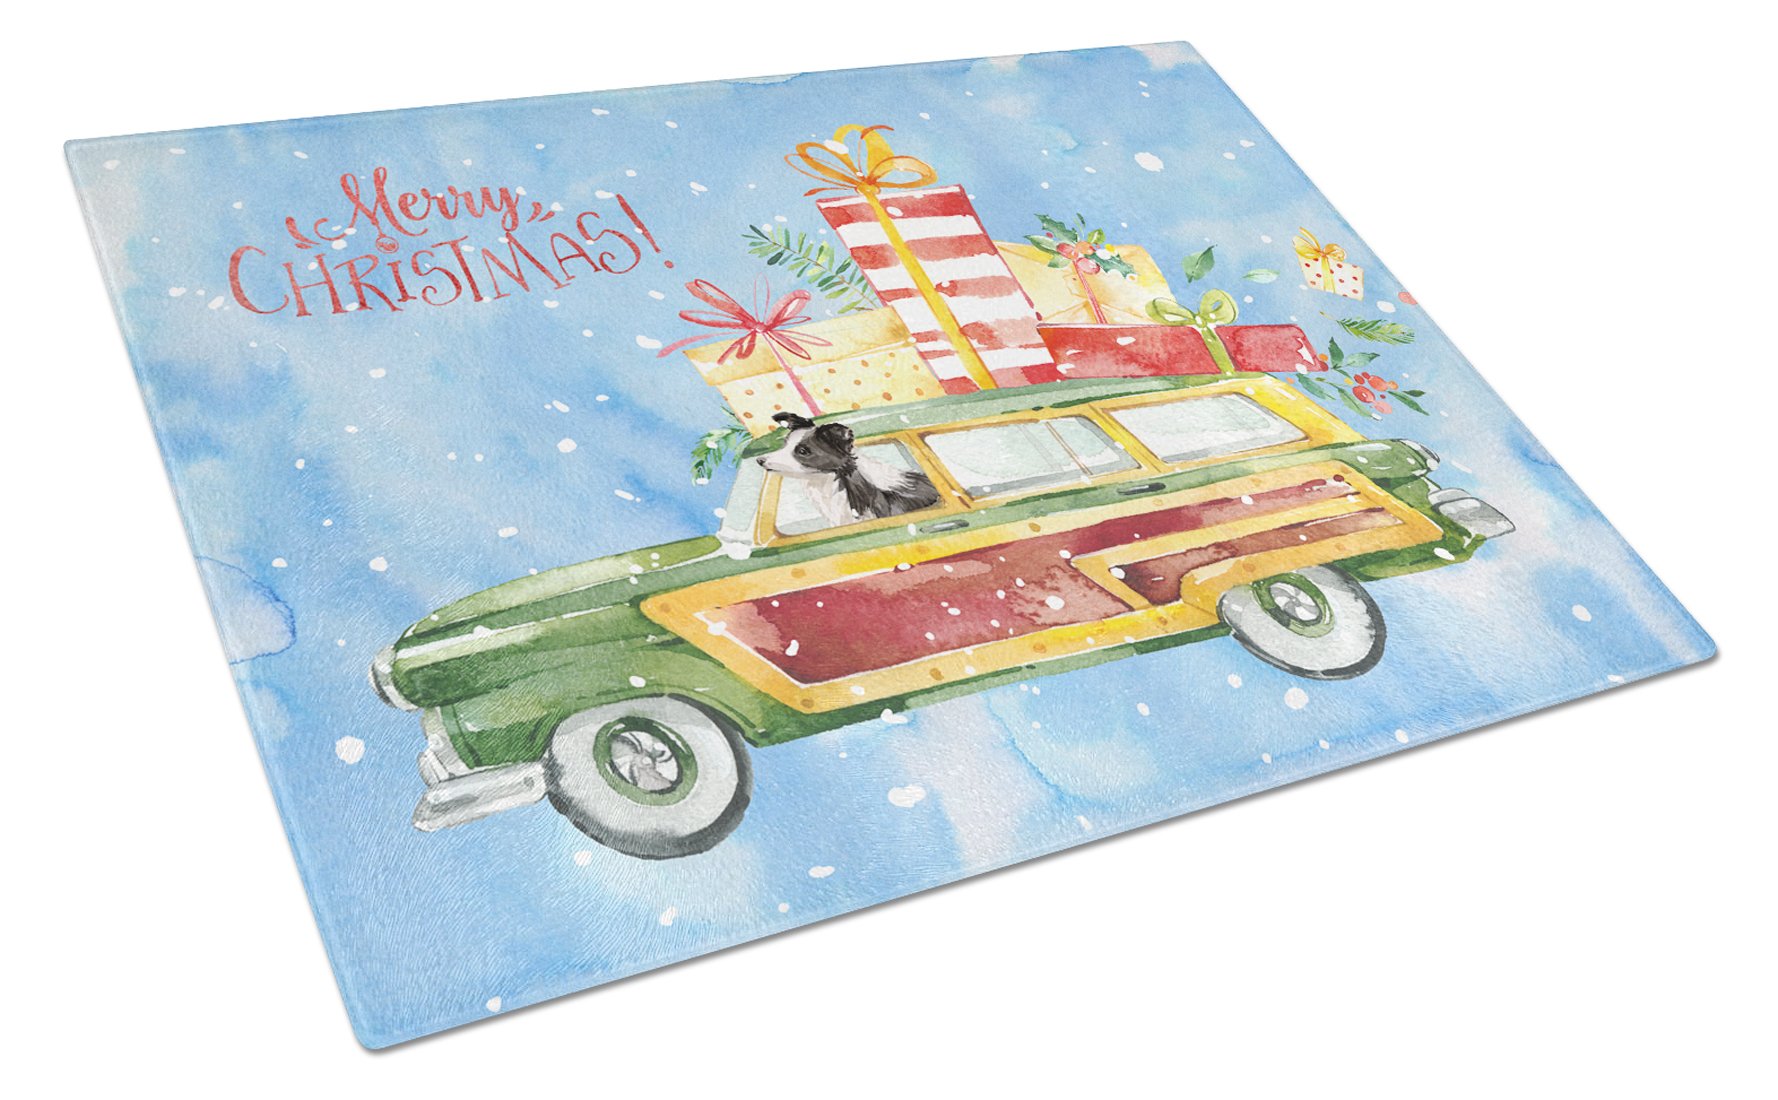 Merry Christmas Border Collie Glass Cutting Board Large CK2445LCB by Caroline's Treasures